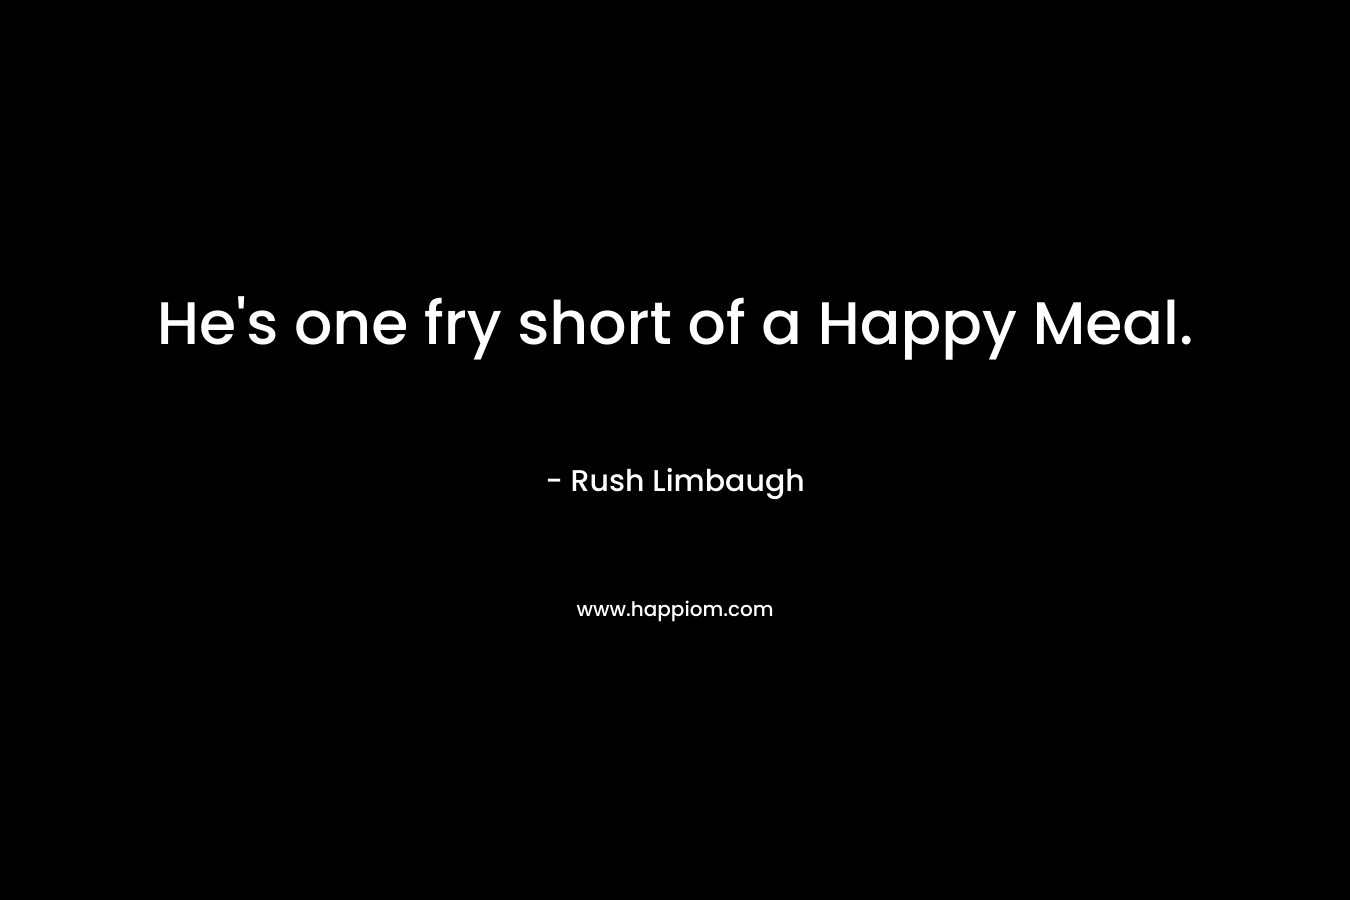 He’s one fry short of a Happy Meal. – Rush Limbaugh